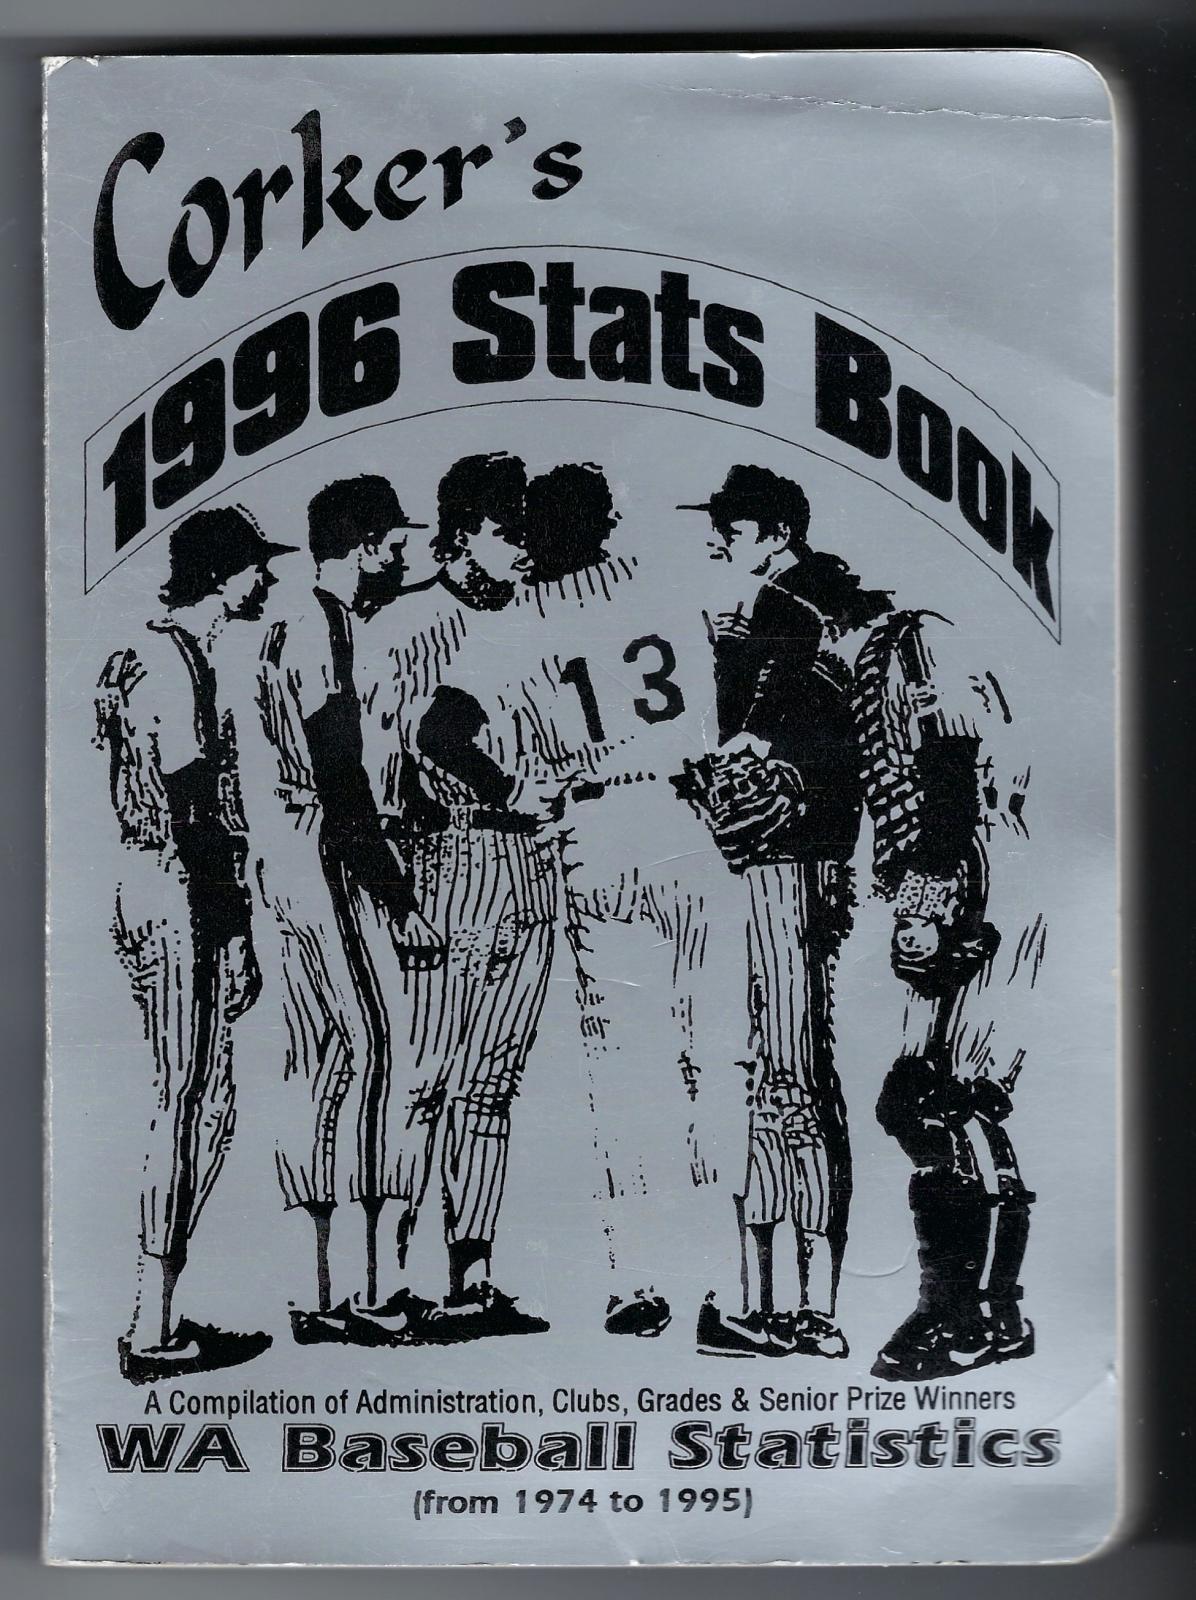 Corker's 1996 Stats Book - WA Baseball Statistics (from 1974 to 1995) - front cover